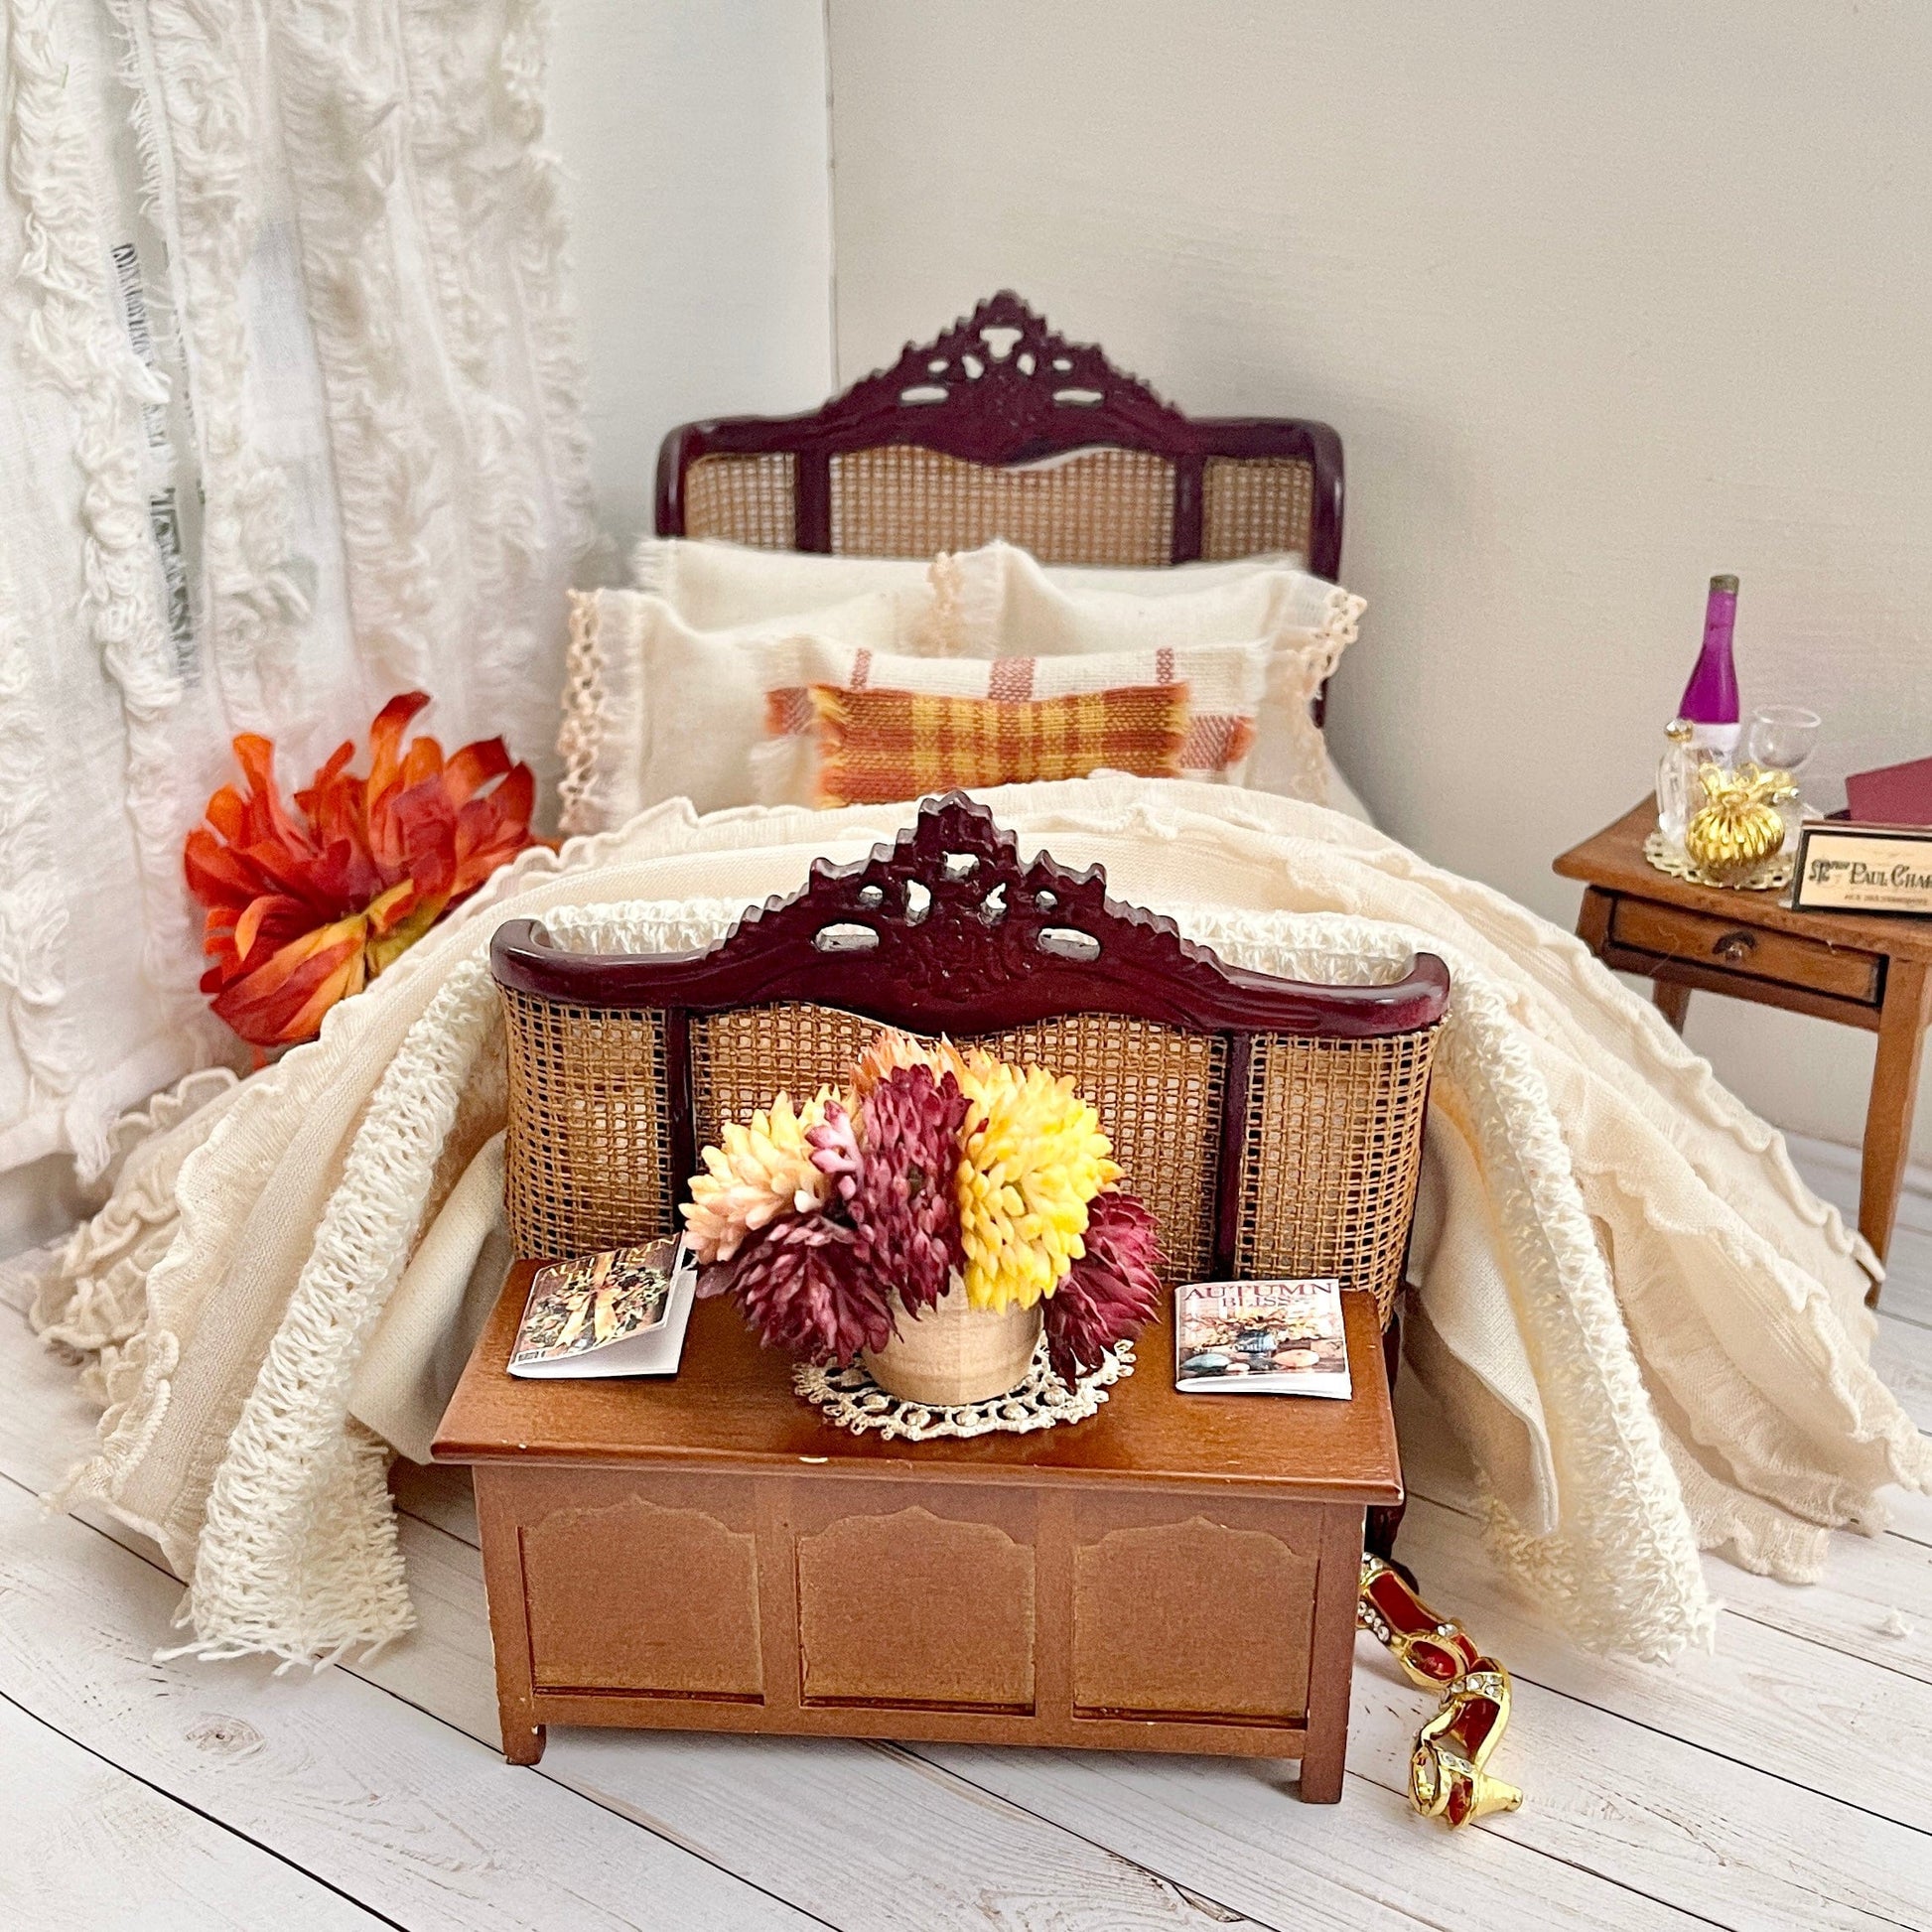 Chantallena Doll House Duvet Covers Home for the Holidays- Autumn Eight Piece Tan Cotton Muslin Bedding Set with Ruffled Throw | Autumn Romance